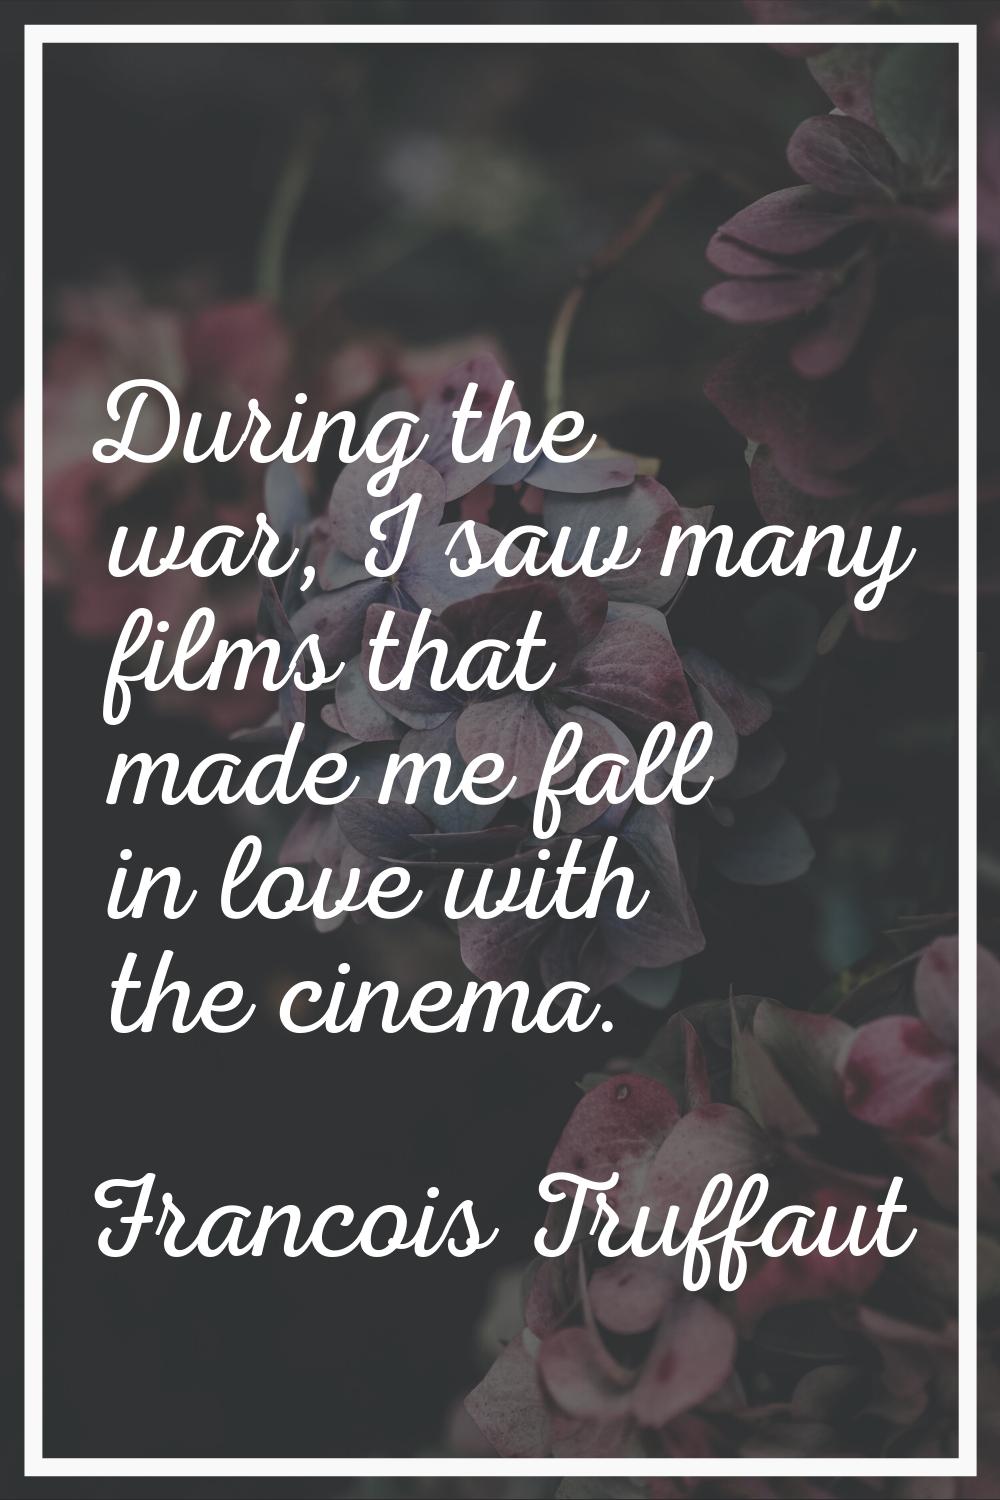 During the war, I saw many films that made me fall in love with the cinema.